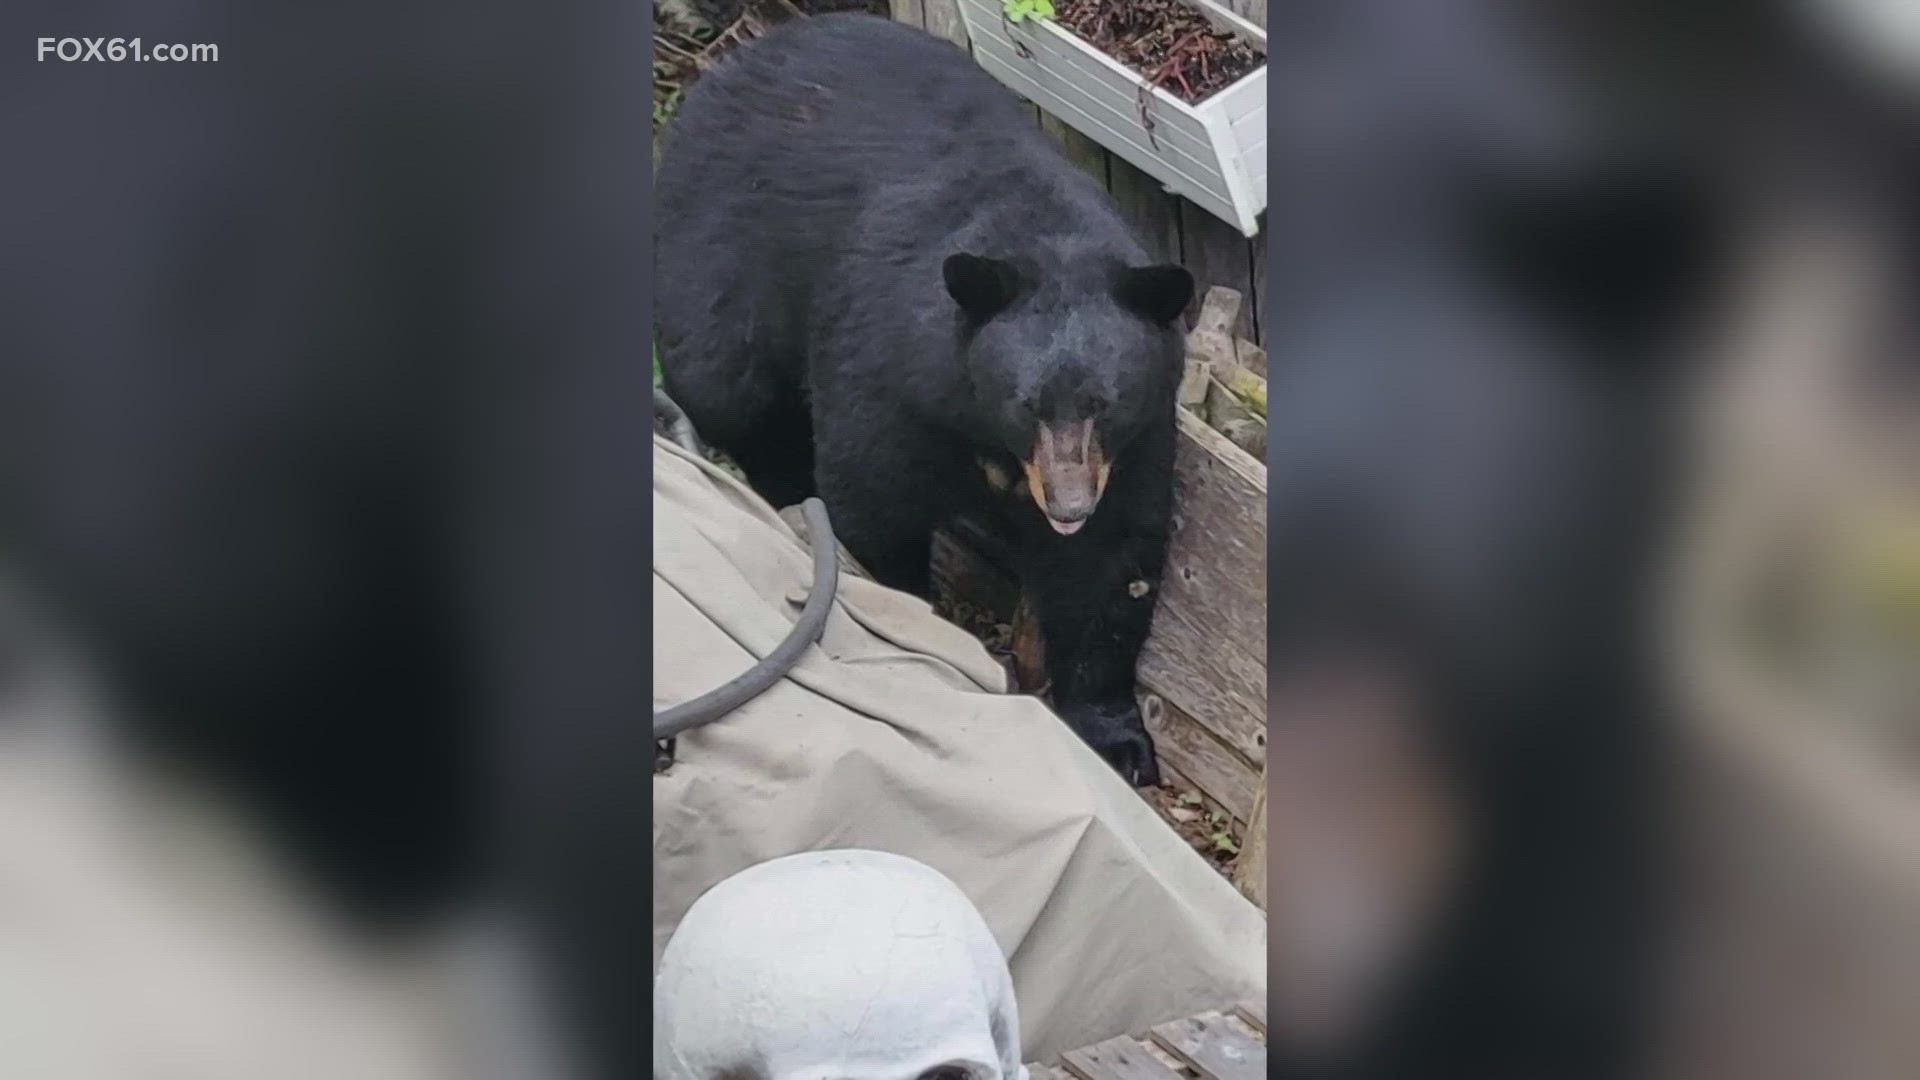 in 2022, bears entered people's homes 67 times in Connecticut.